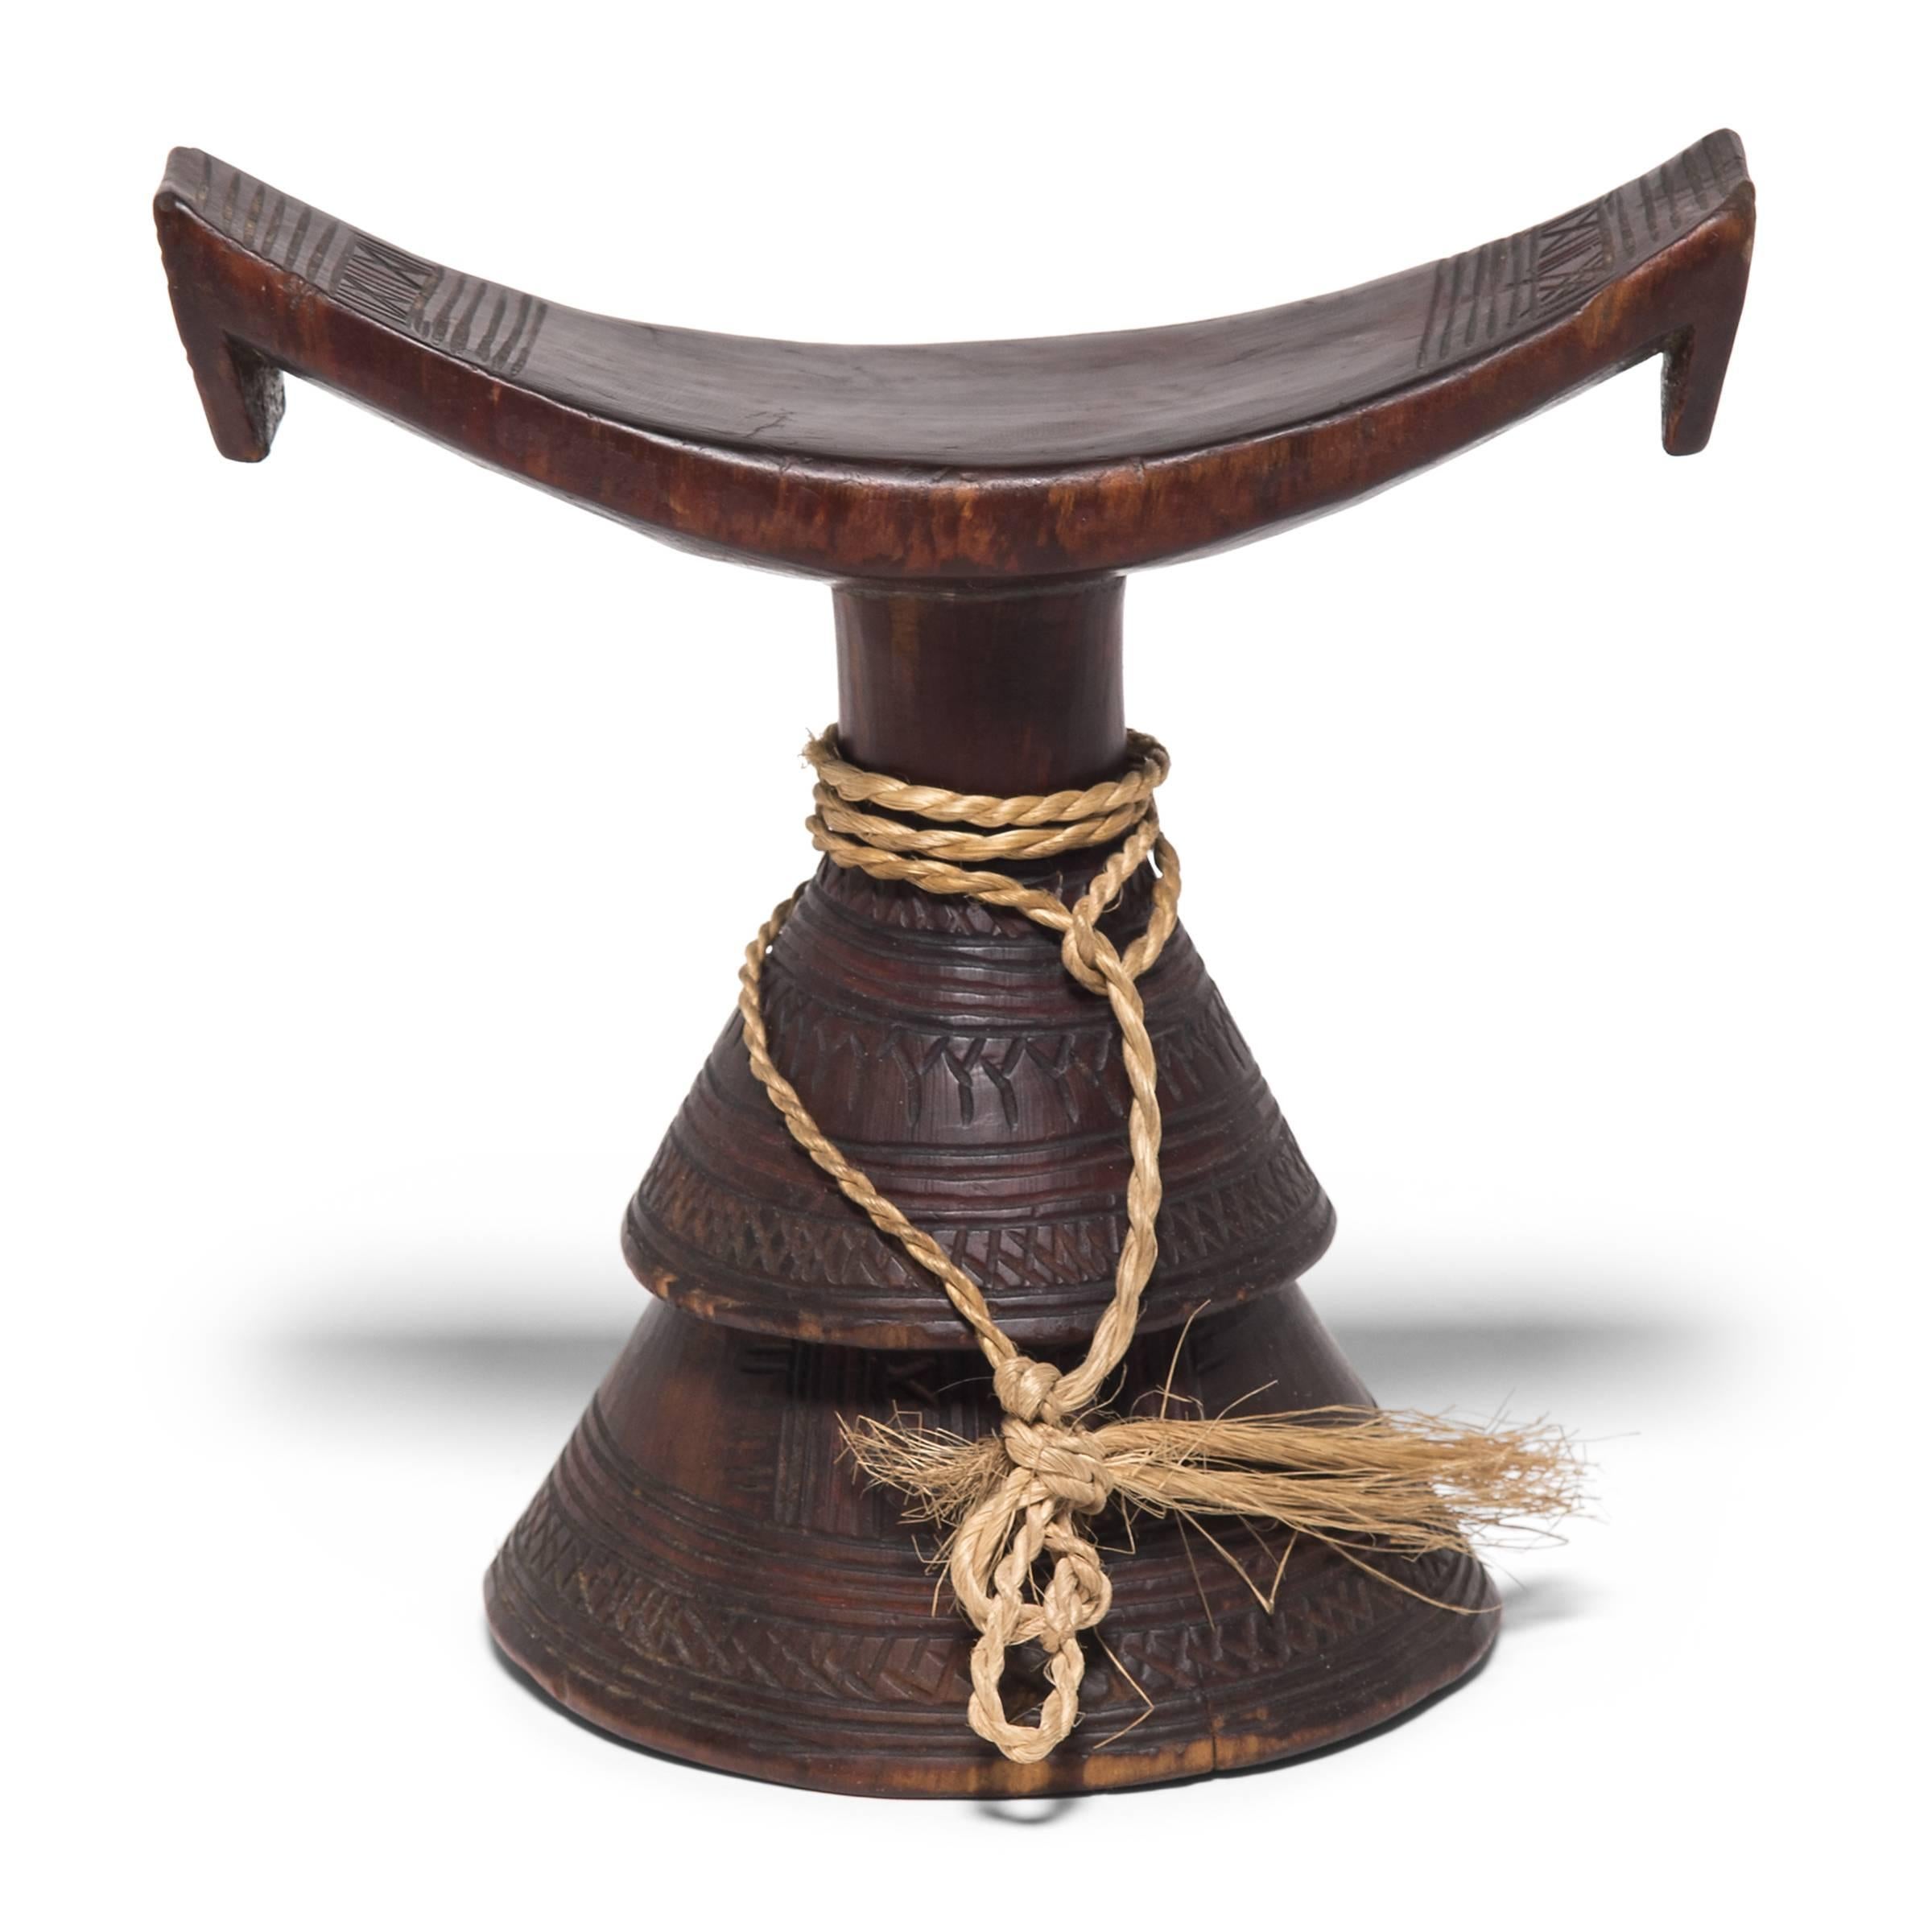 So as not to muss their intricate hairstyles, tribal leaders would rest their heads on these petite wooden stands. The combination of conic base and concave rest gives these functional items an elevated sense of artistry. Intricately detailed and